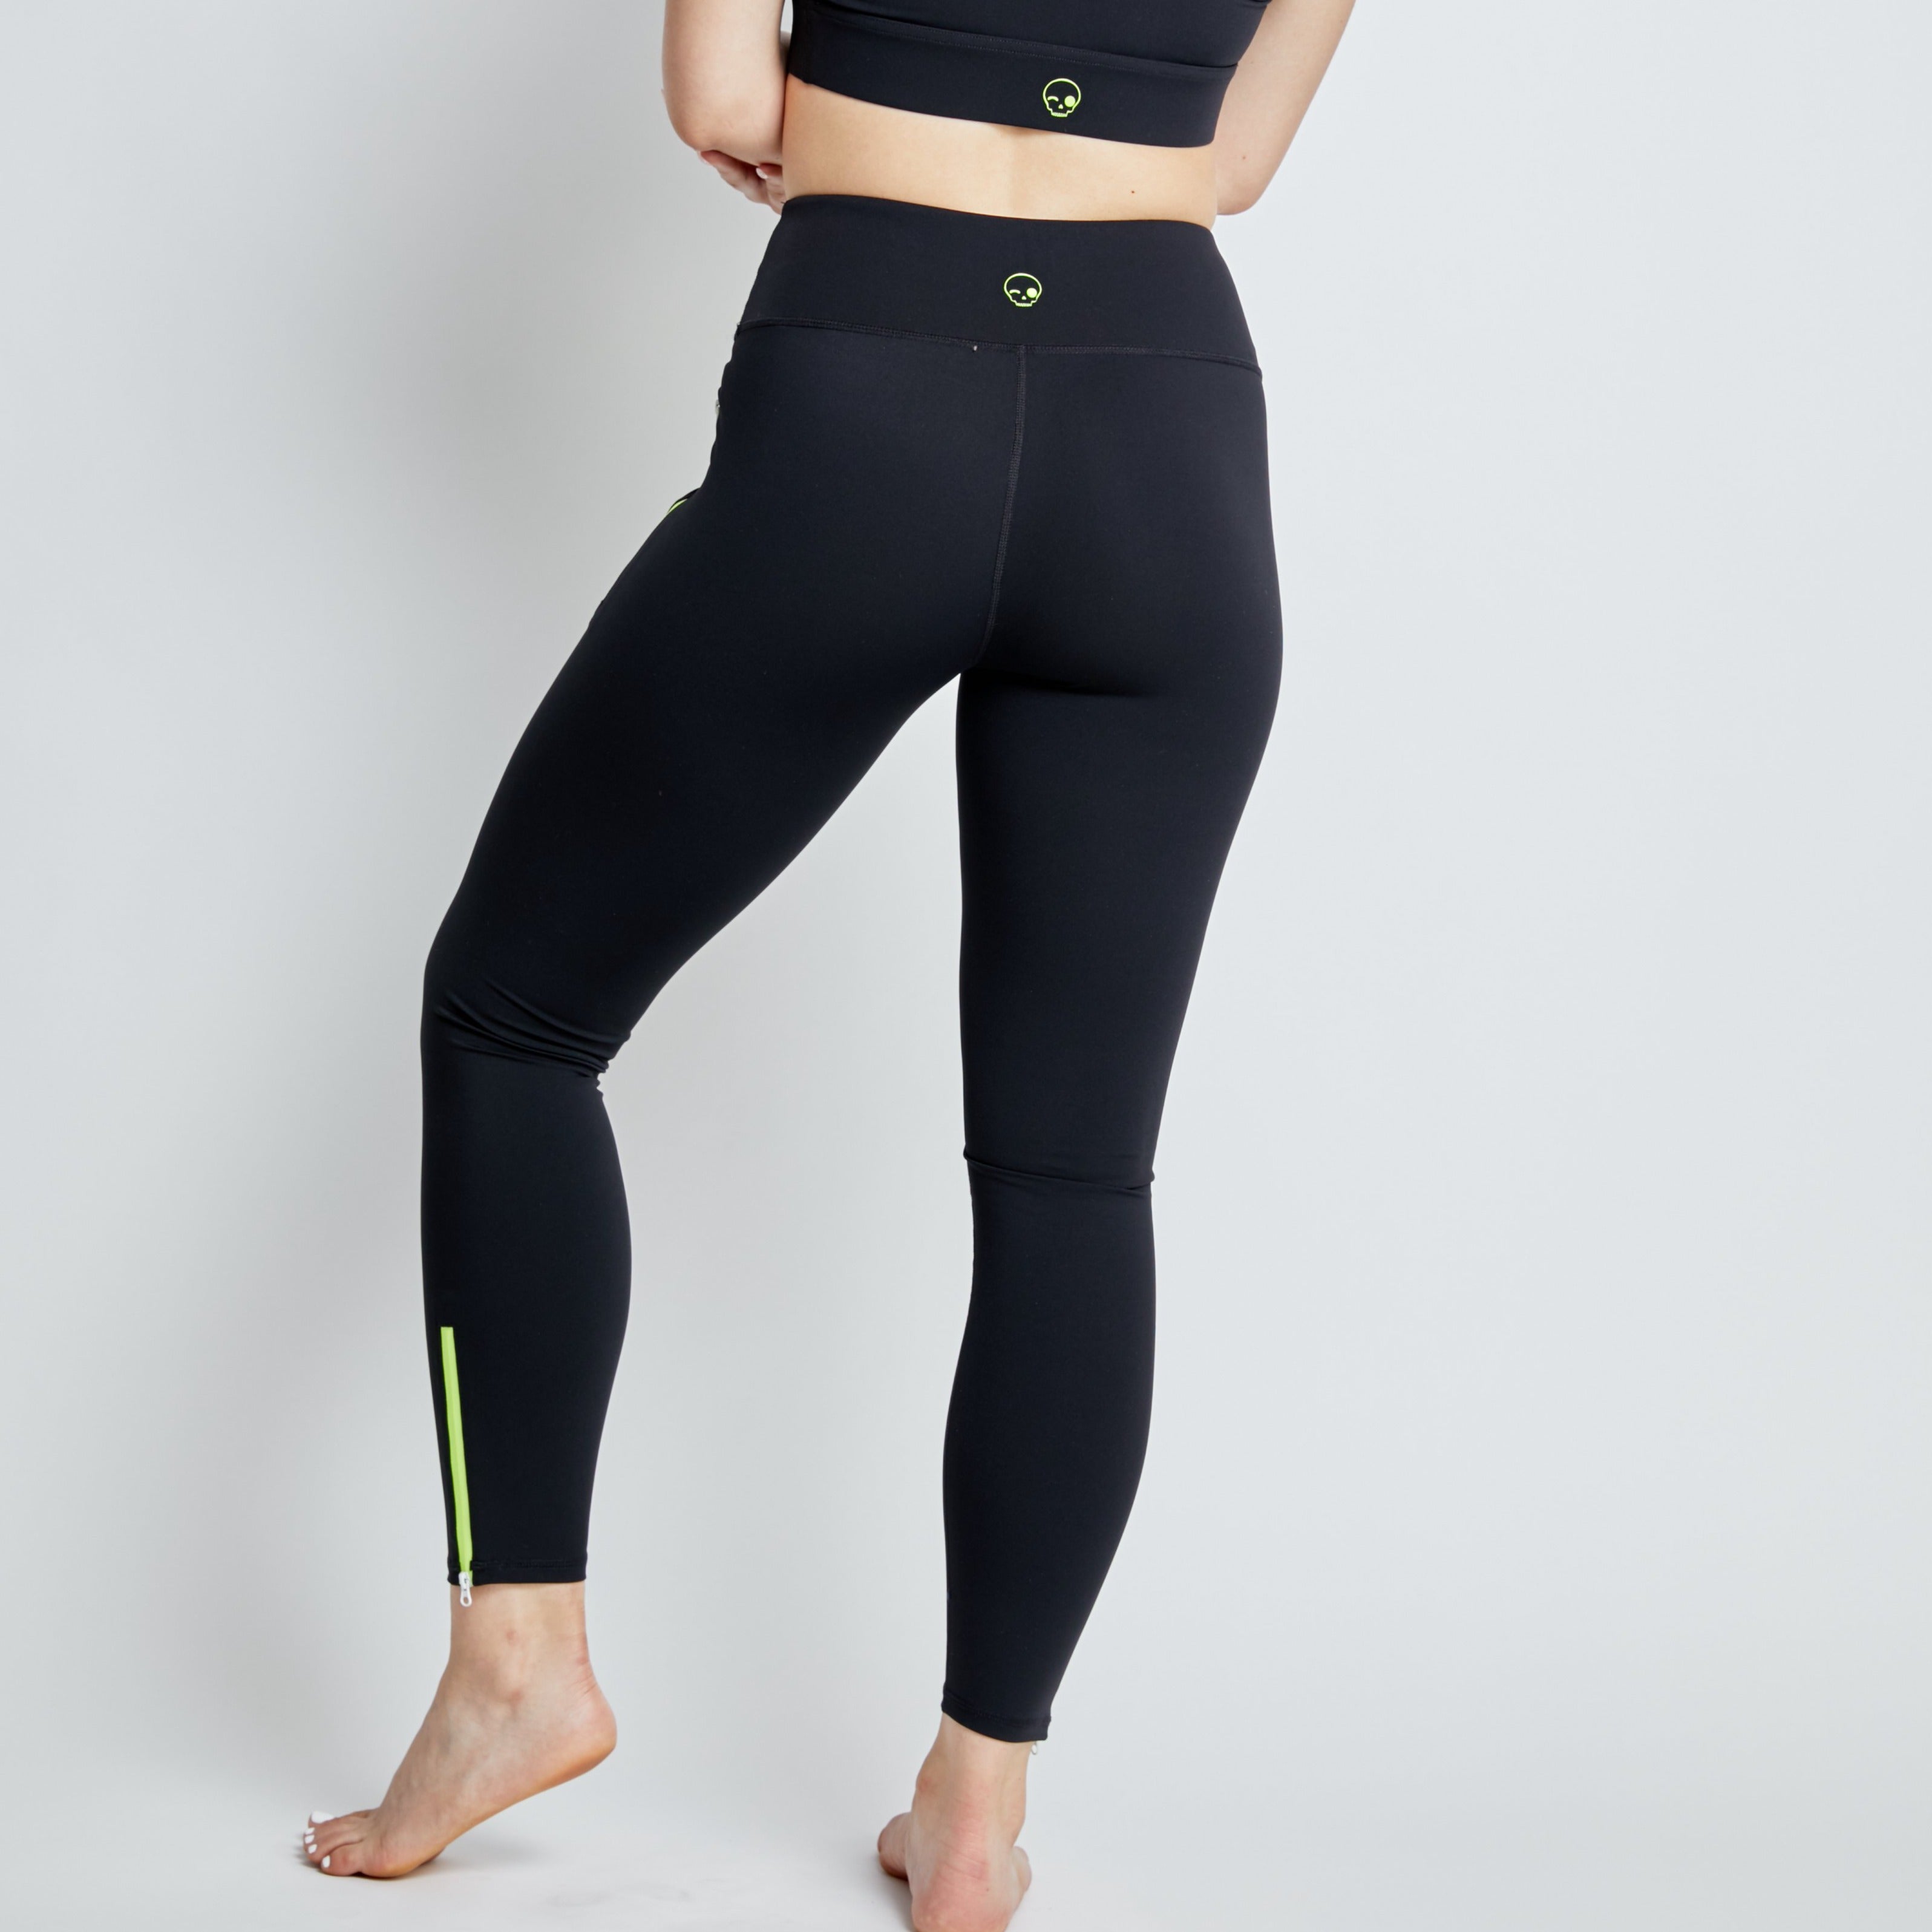 usa activewear shorts for women